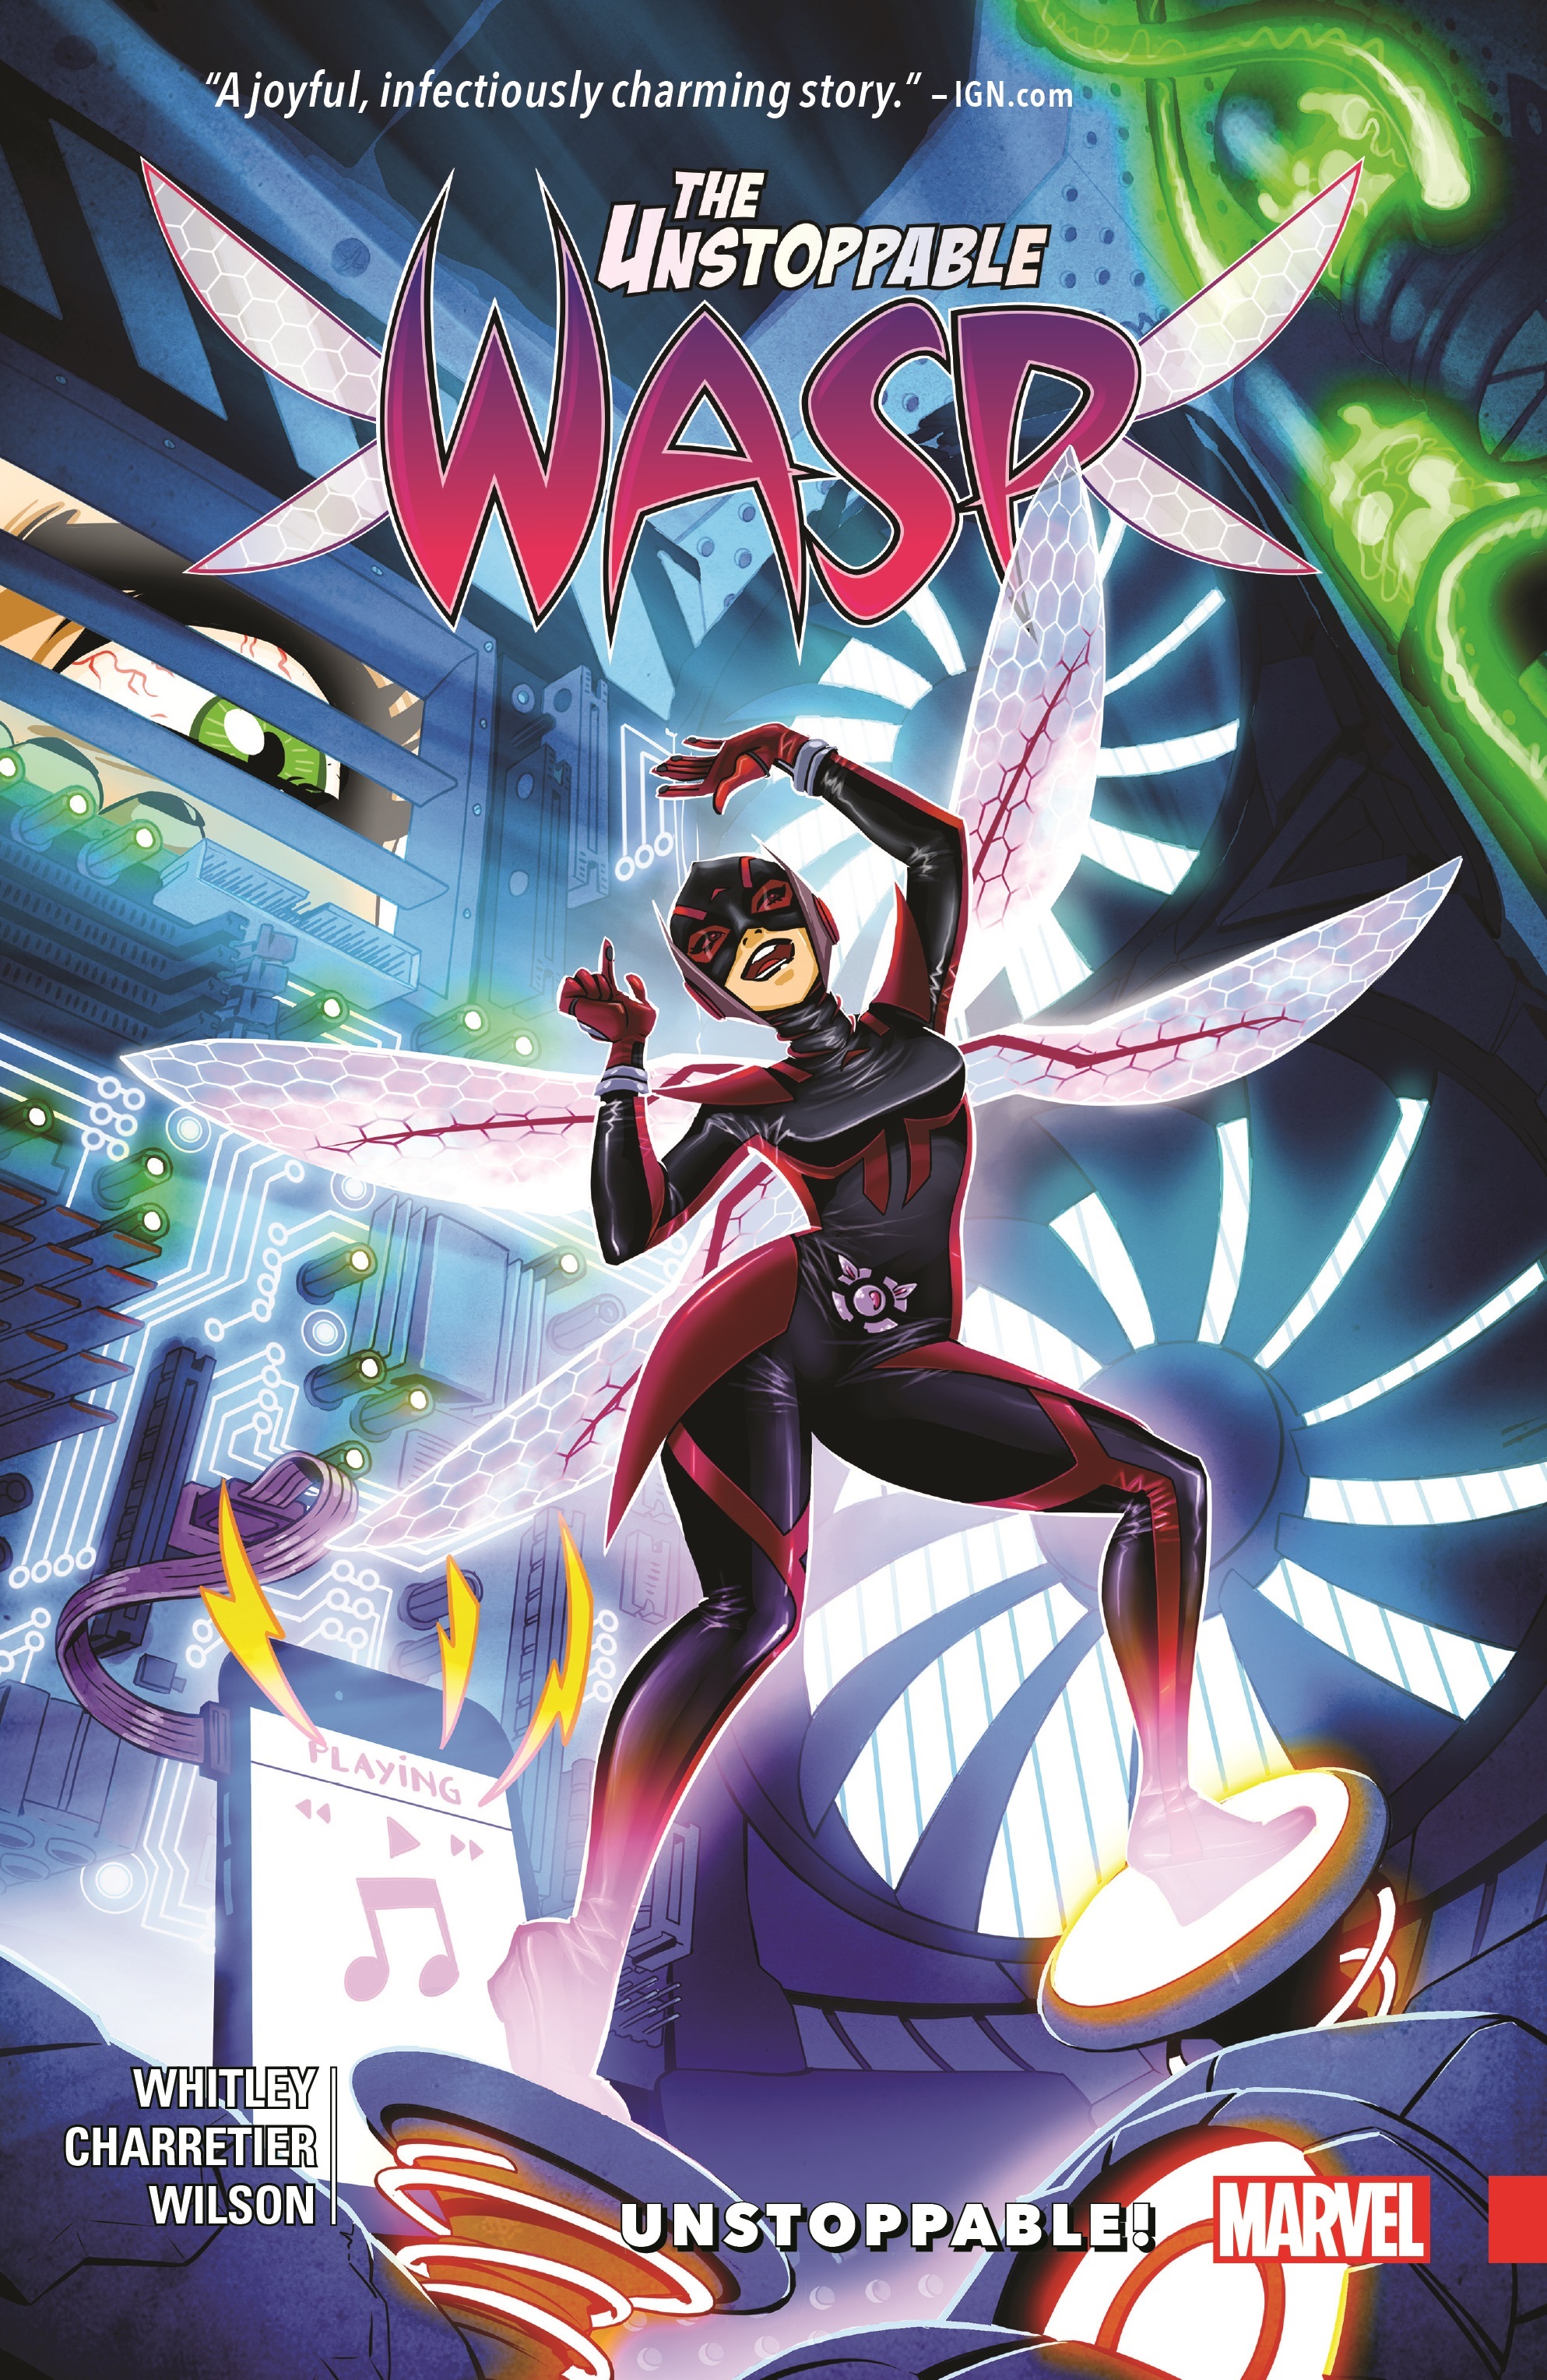 THE UNSTOPPABLE WASP VOL. 1: UNSTOPPABLE! TPB (Trade Paperback)